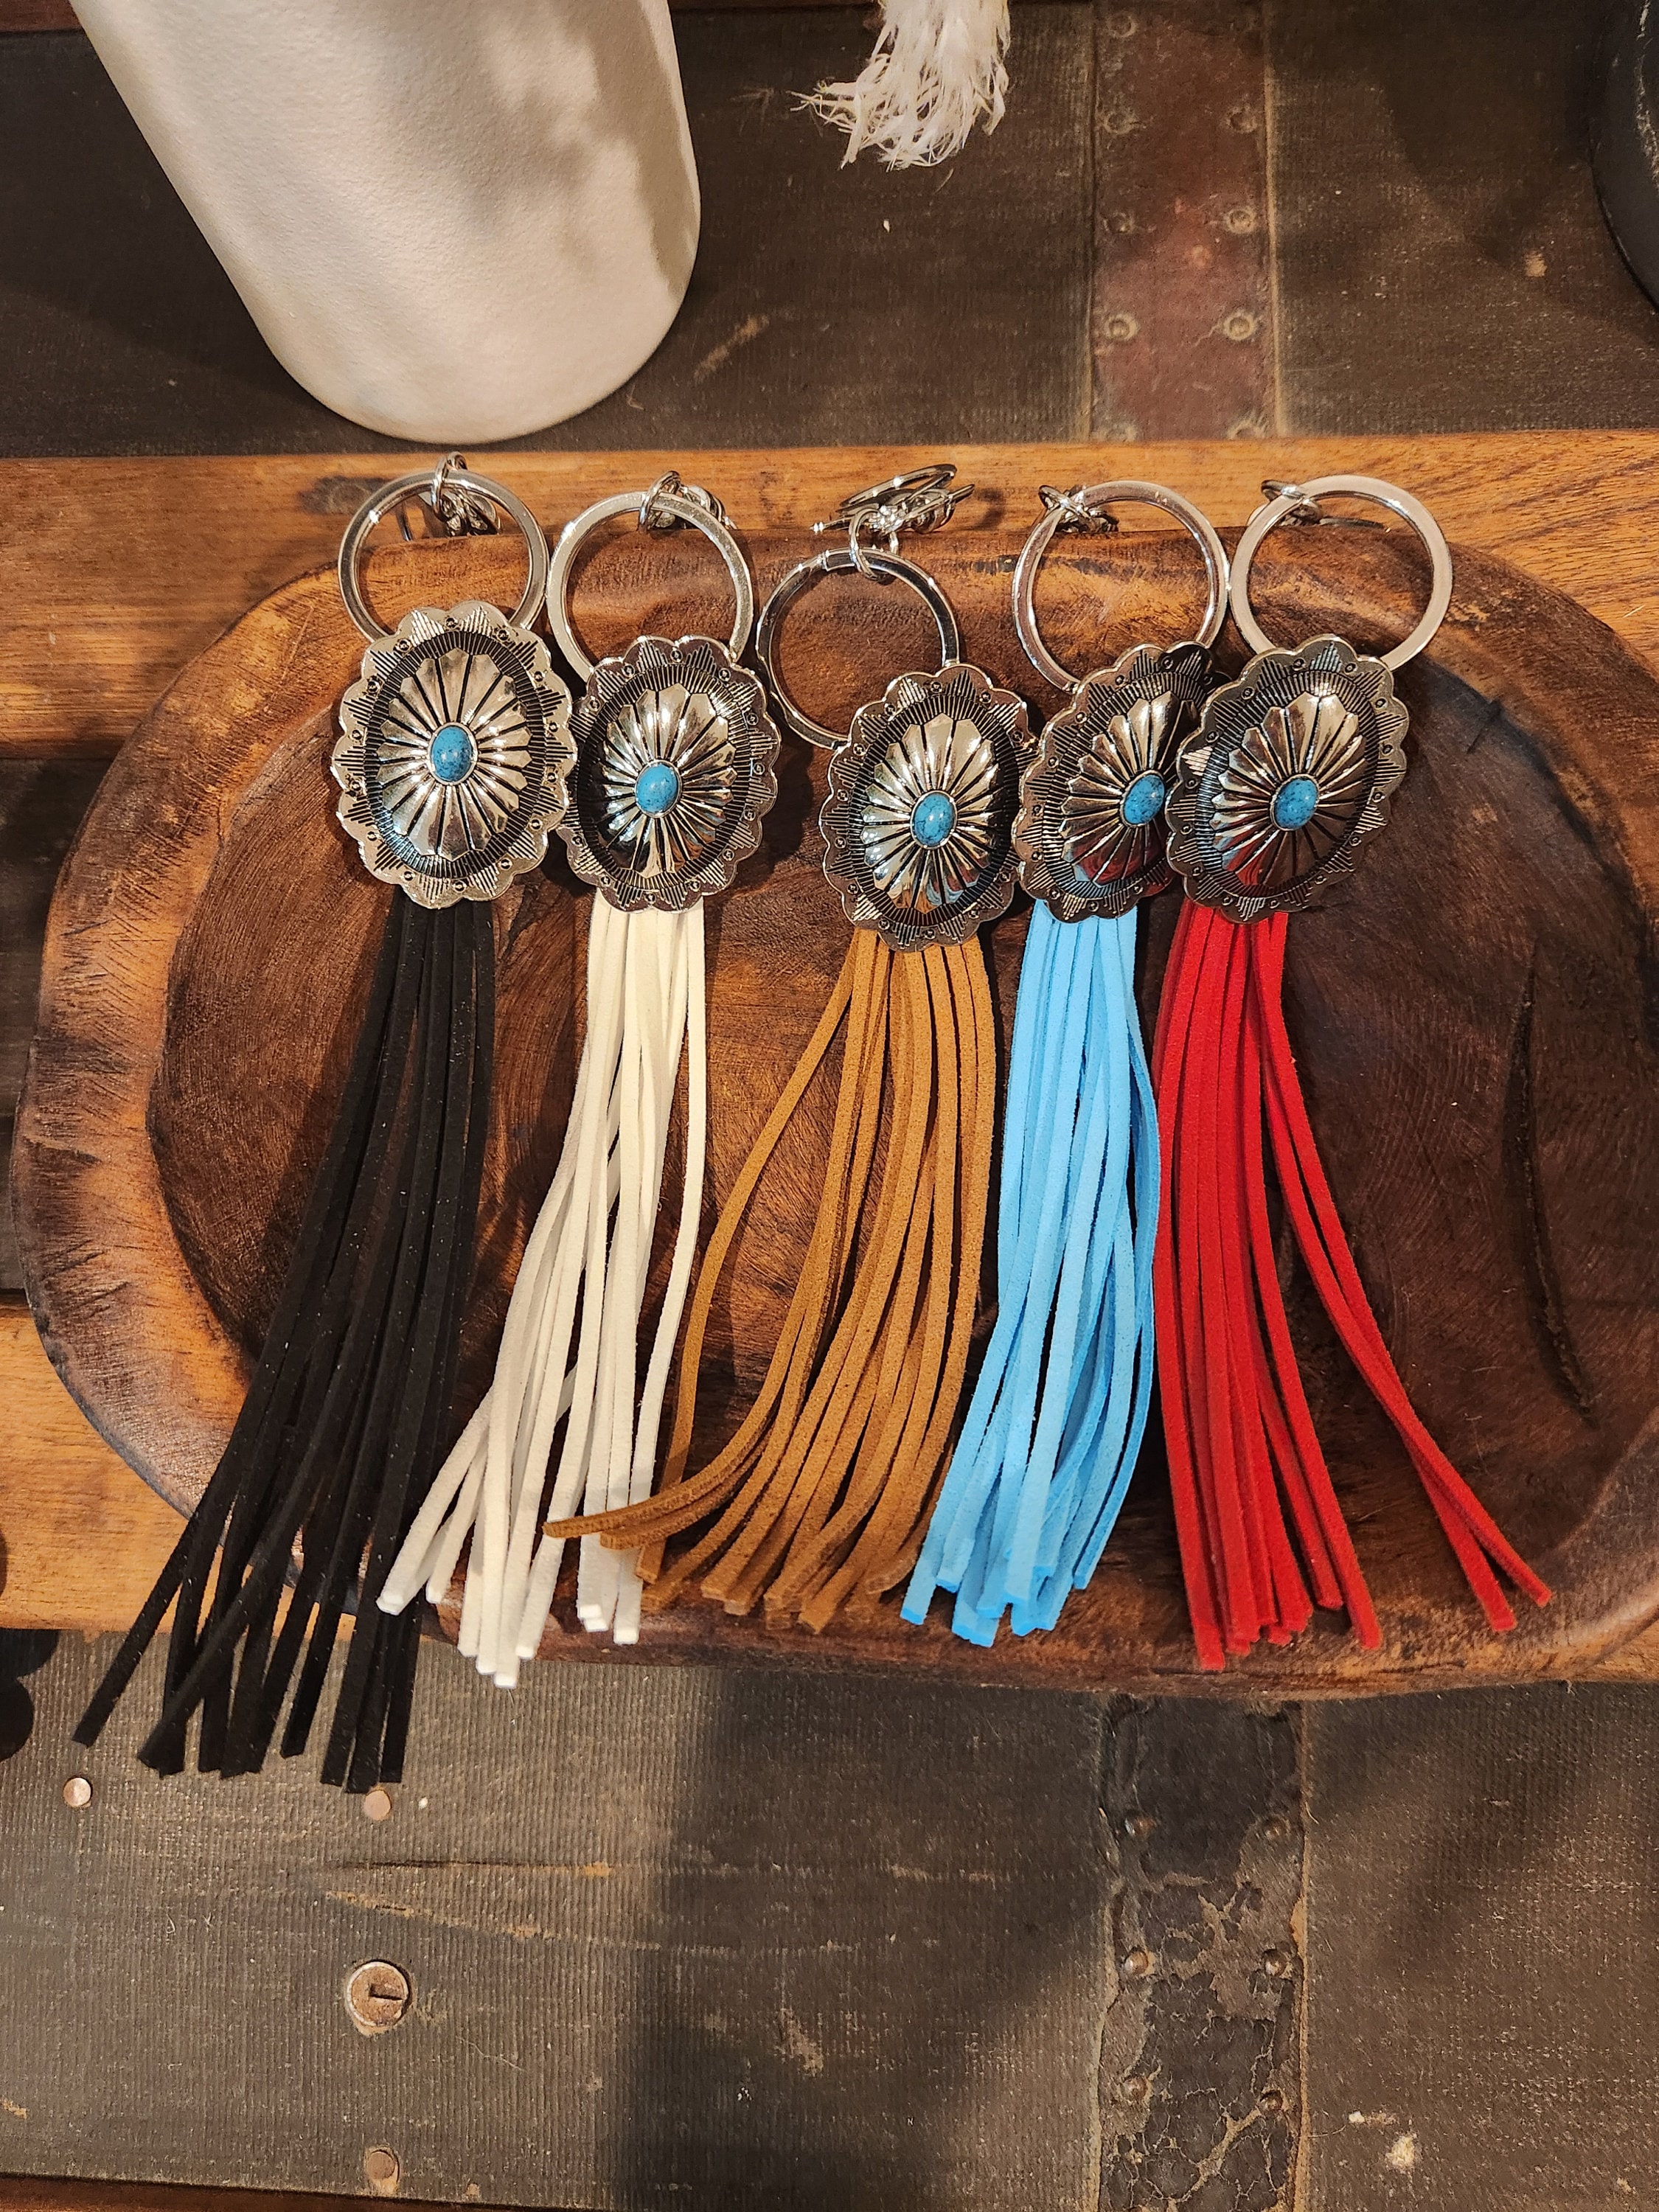 Western Metal Concho Button Faux Suede Leather Tassel Keychain